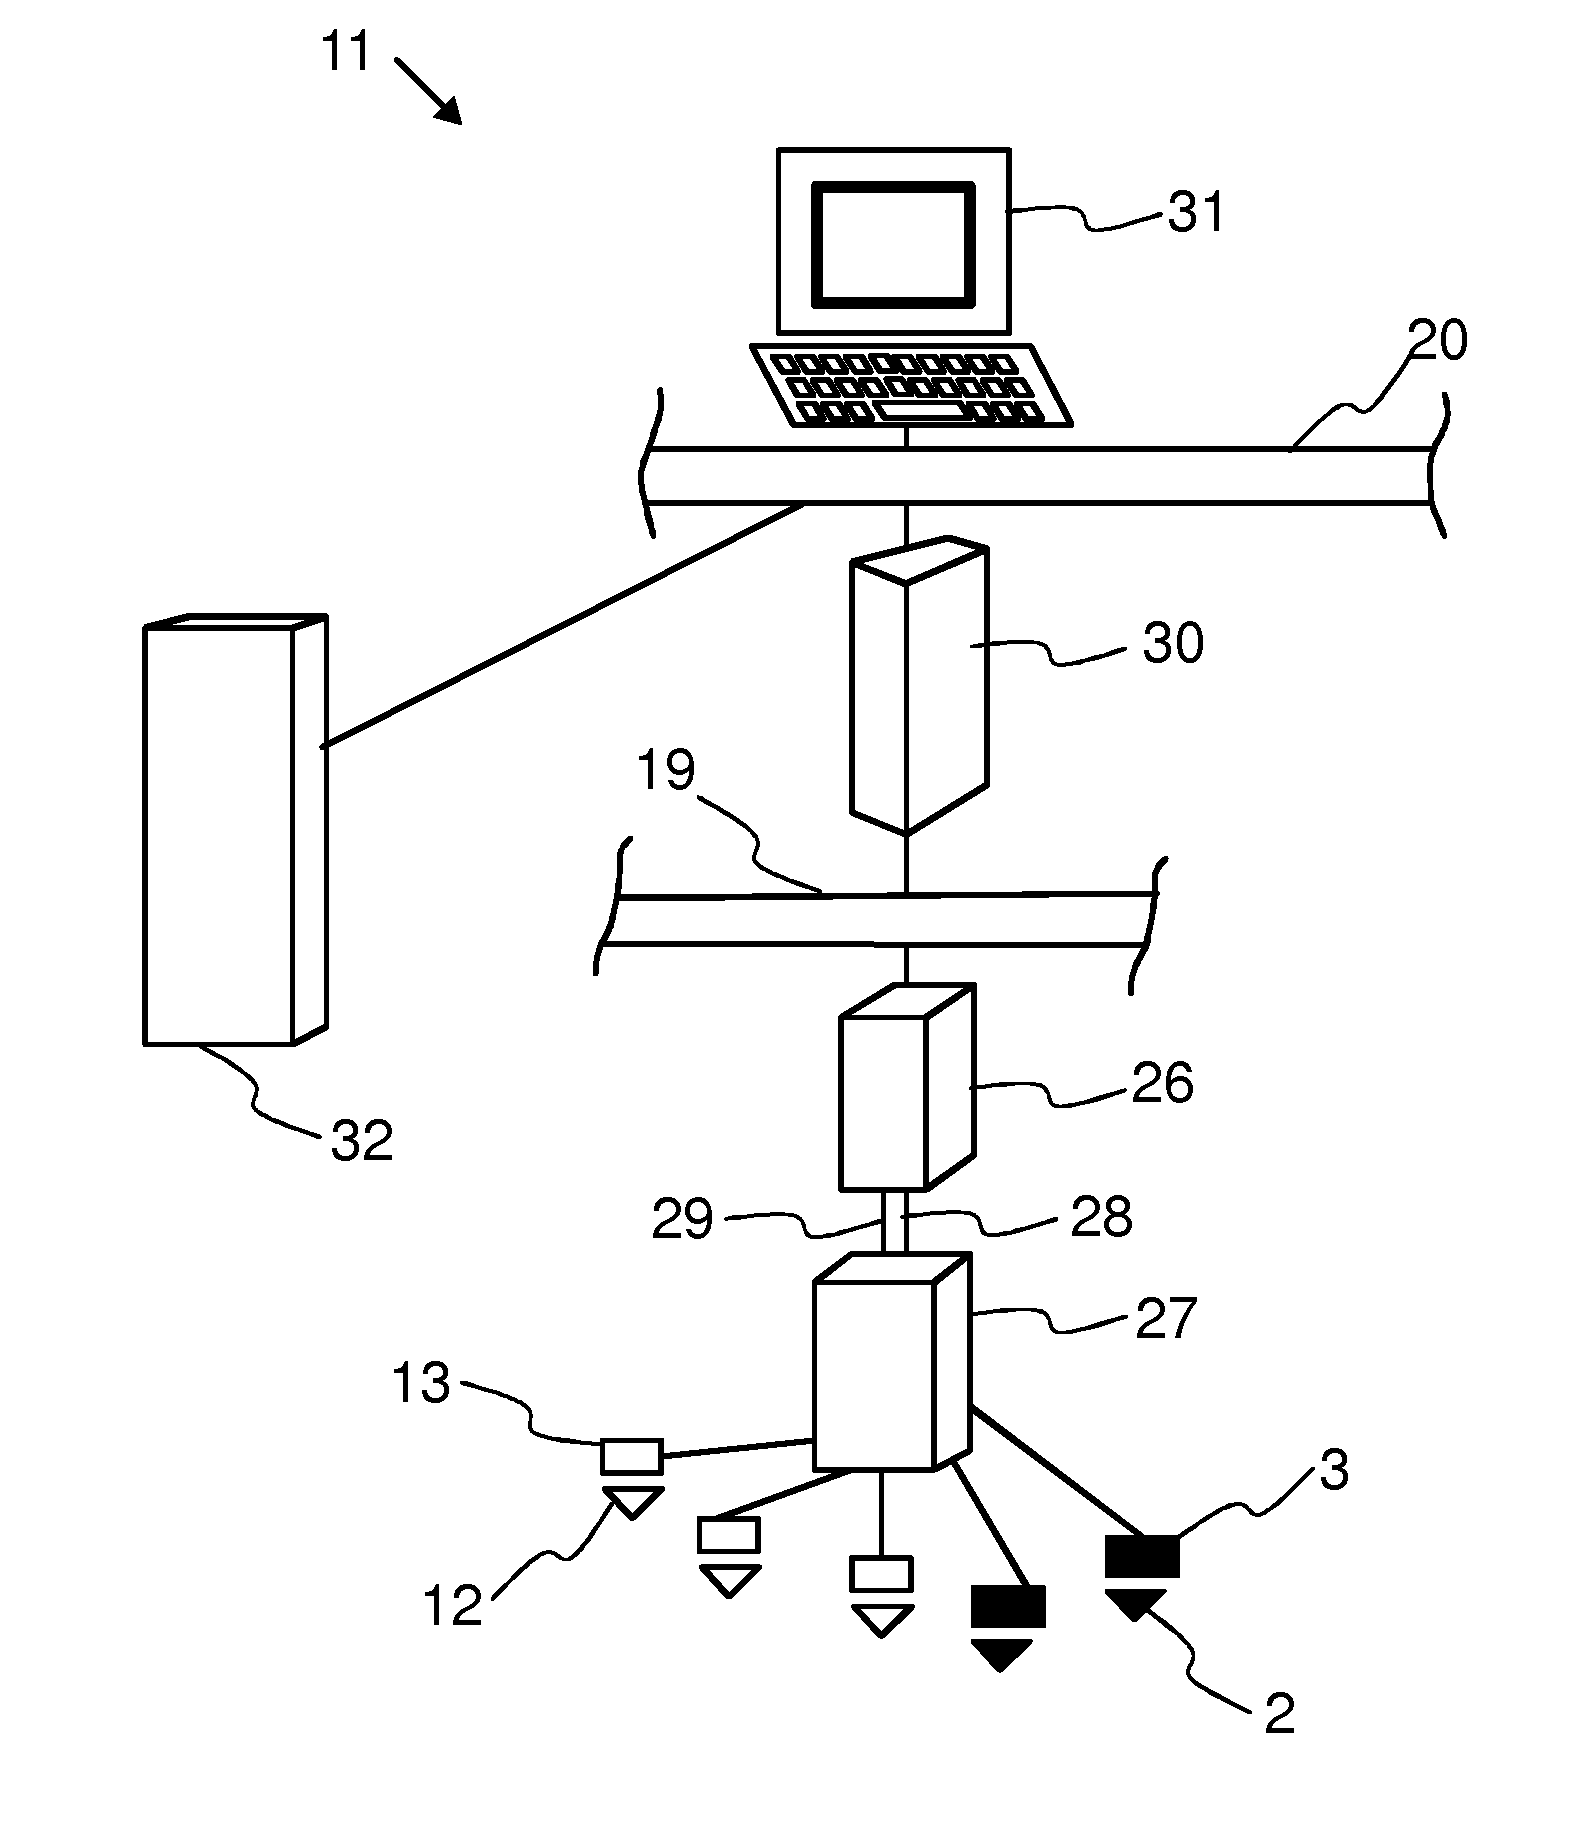 Method for controlling a process and for monitoring the condition of process equipment, and an automation system